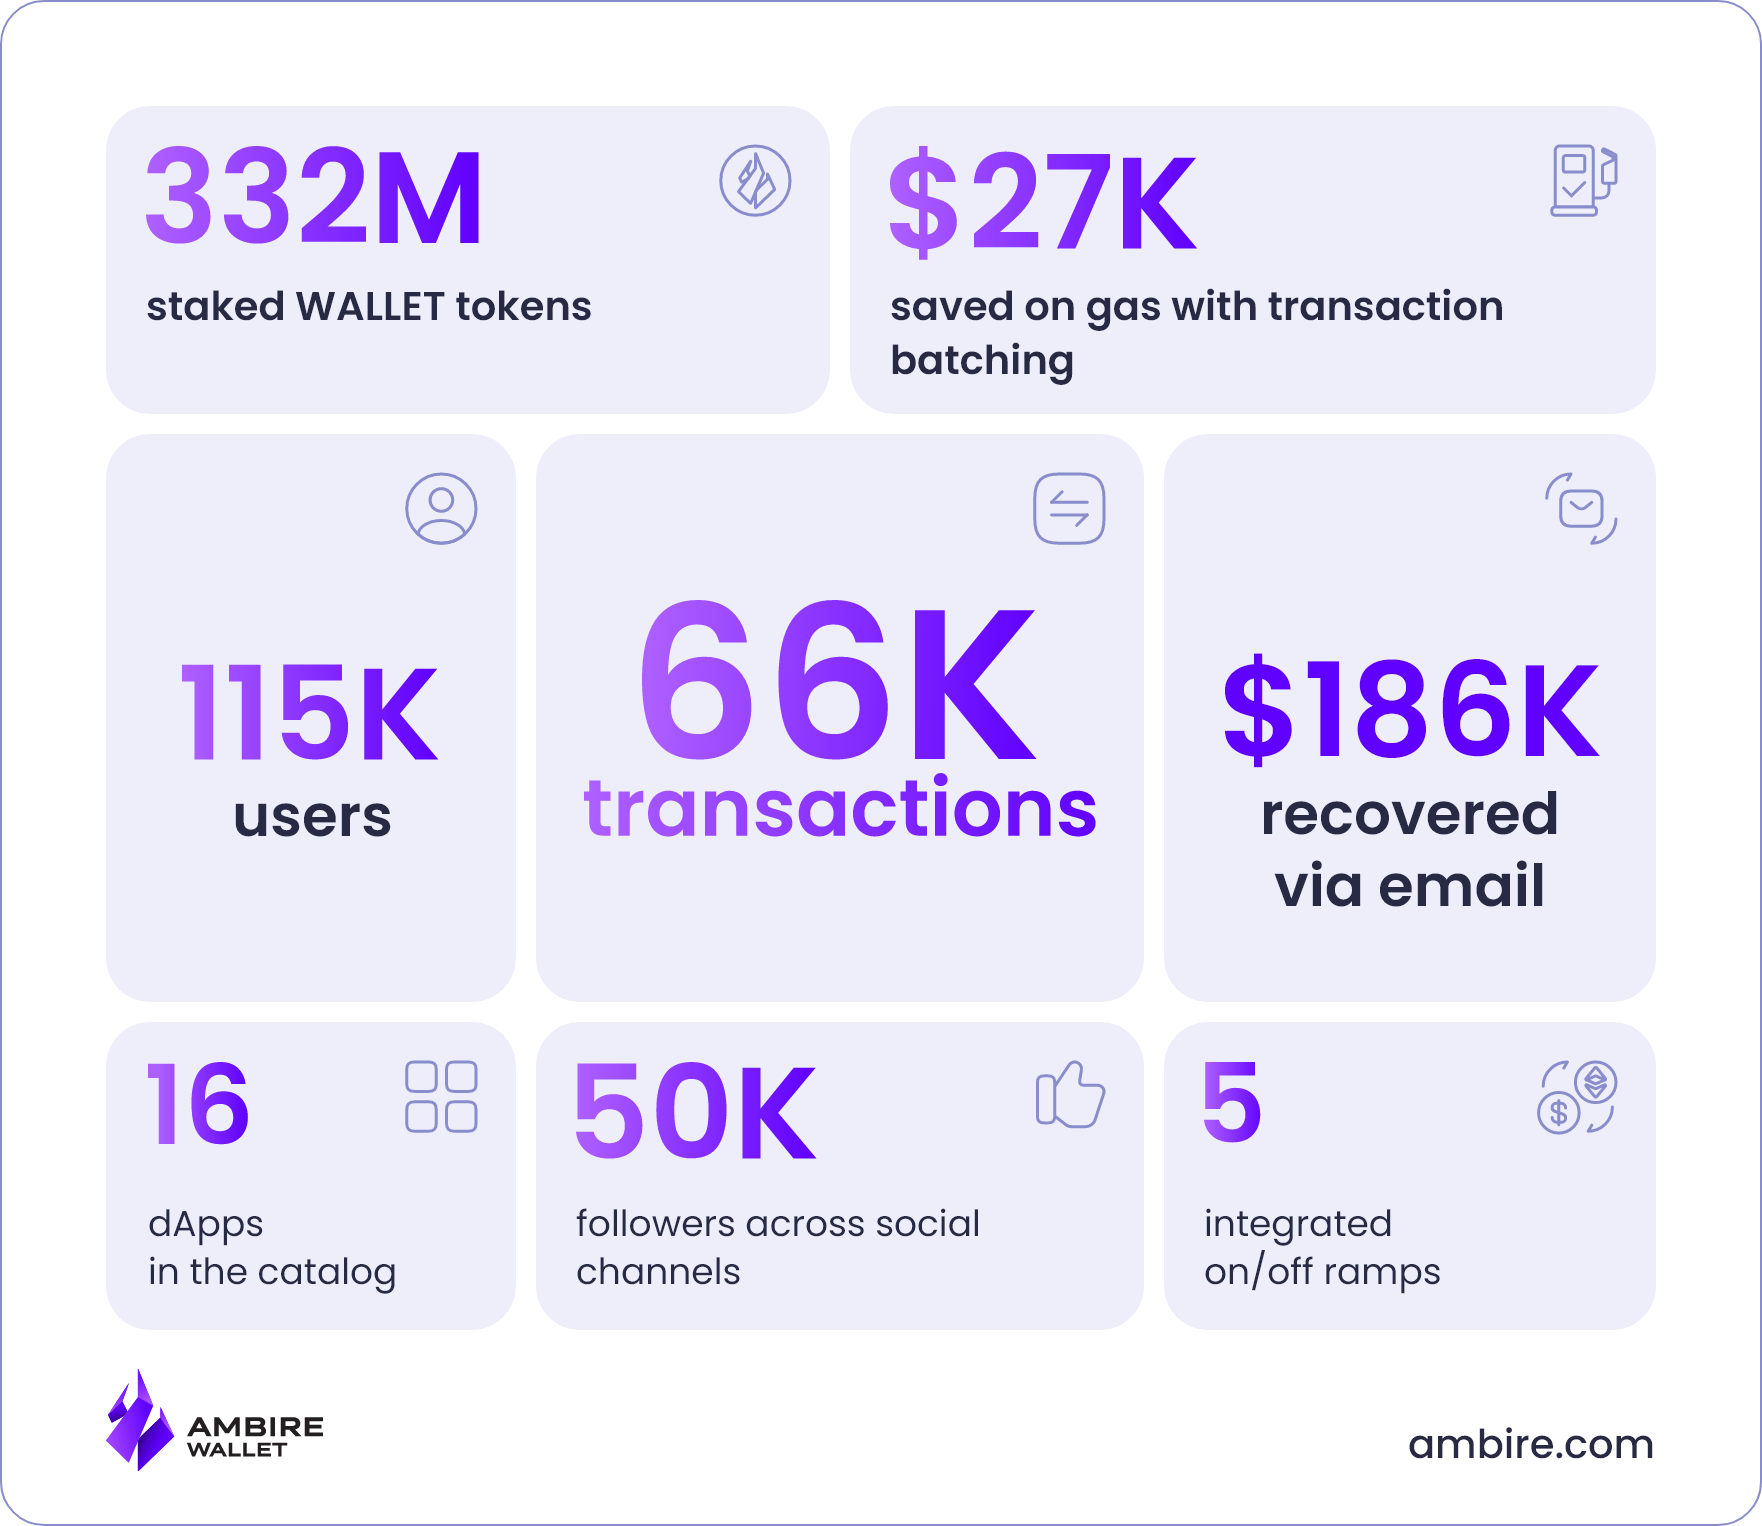 Ambire Wallet milestones in numbers for the past two years